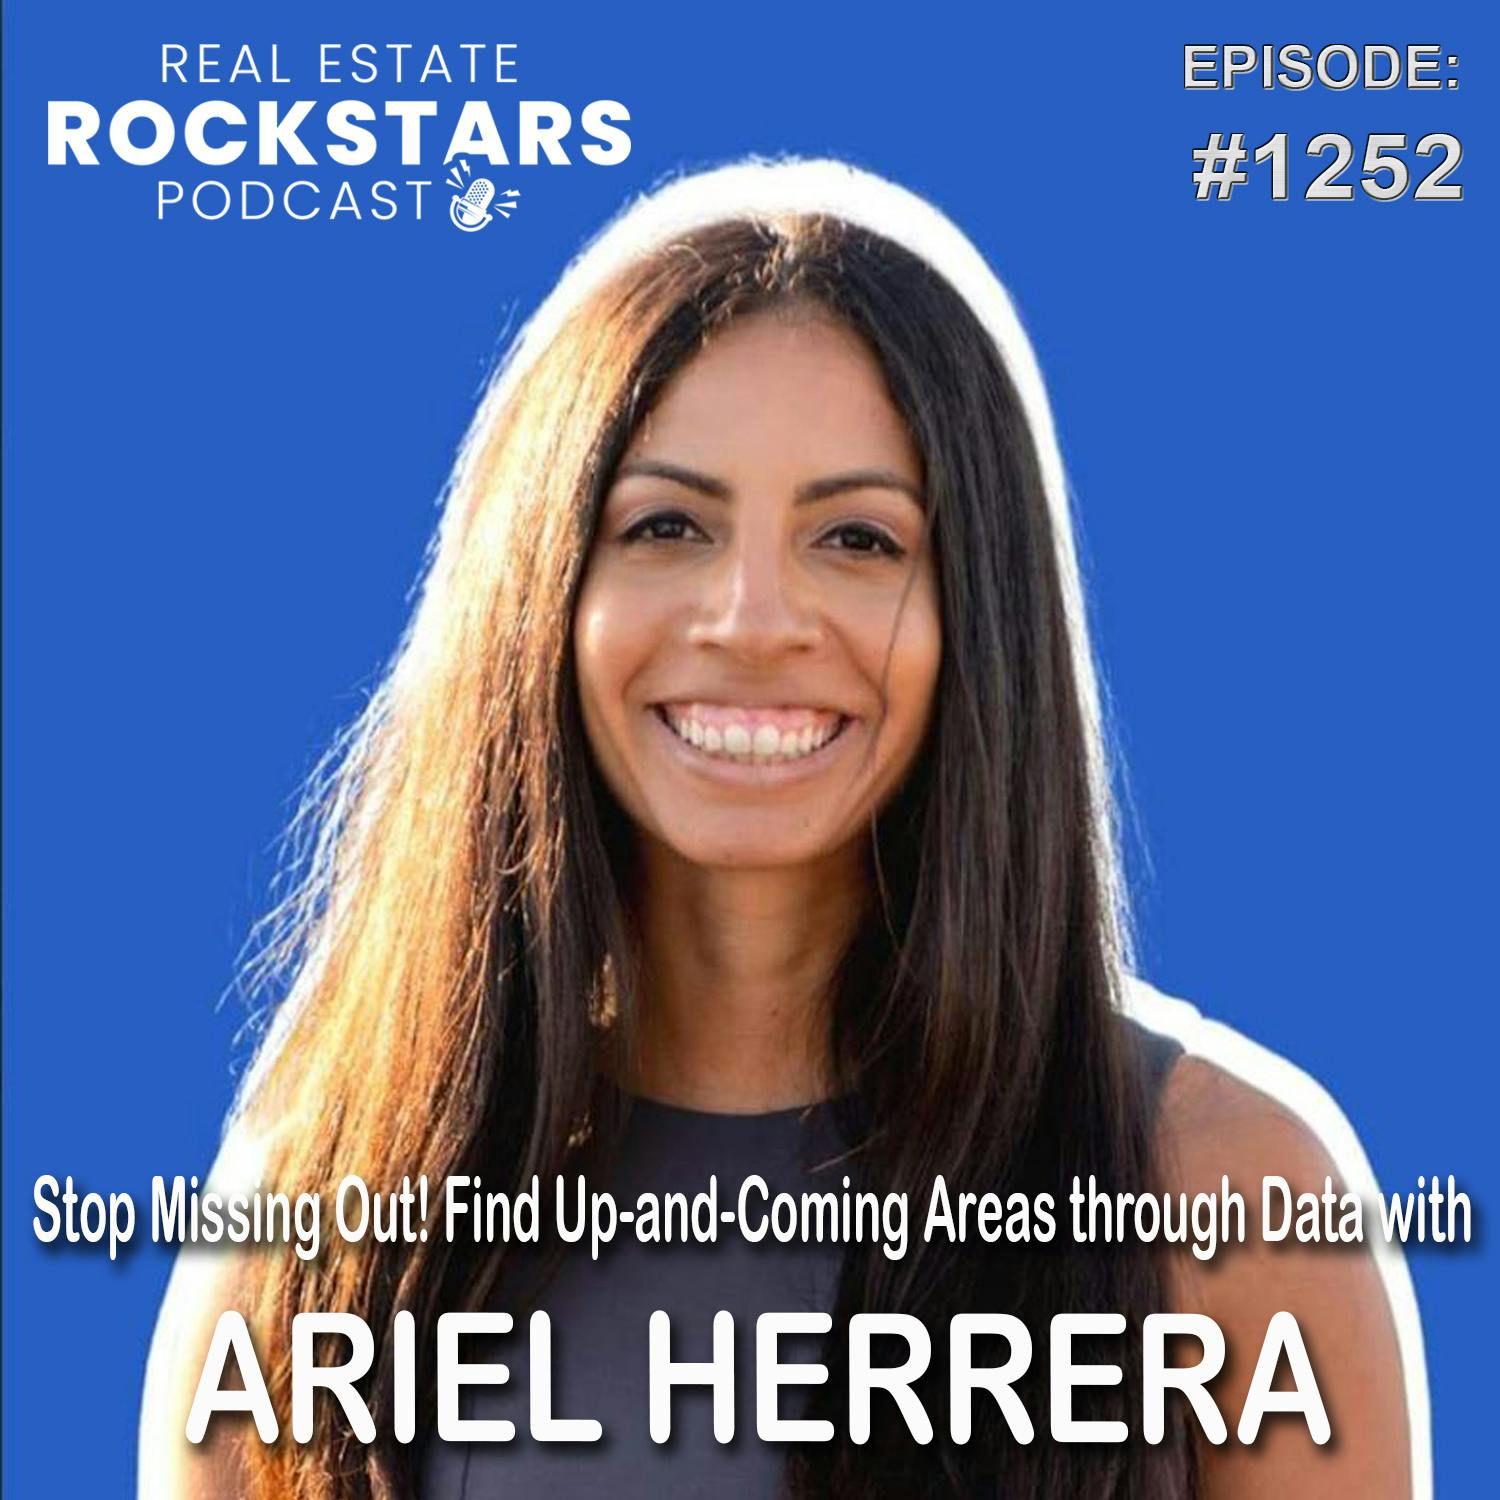 1252: Stop Missing Out! Find Up-and-Coming Areas through Data with Ariel Herrera